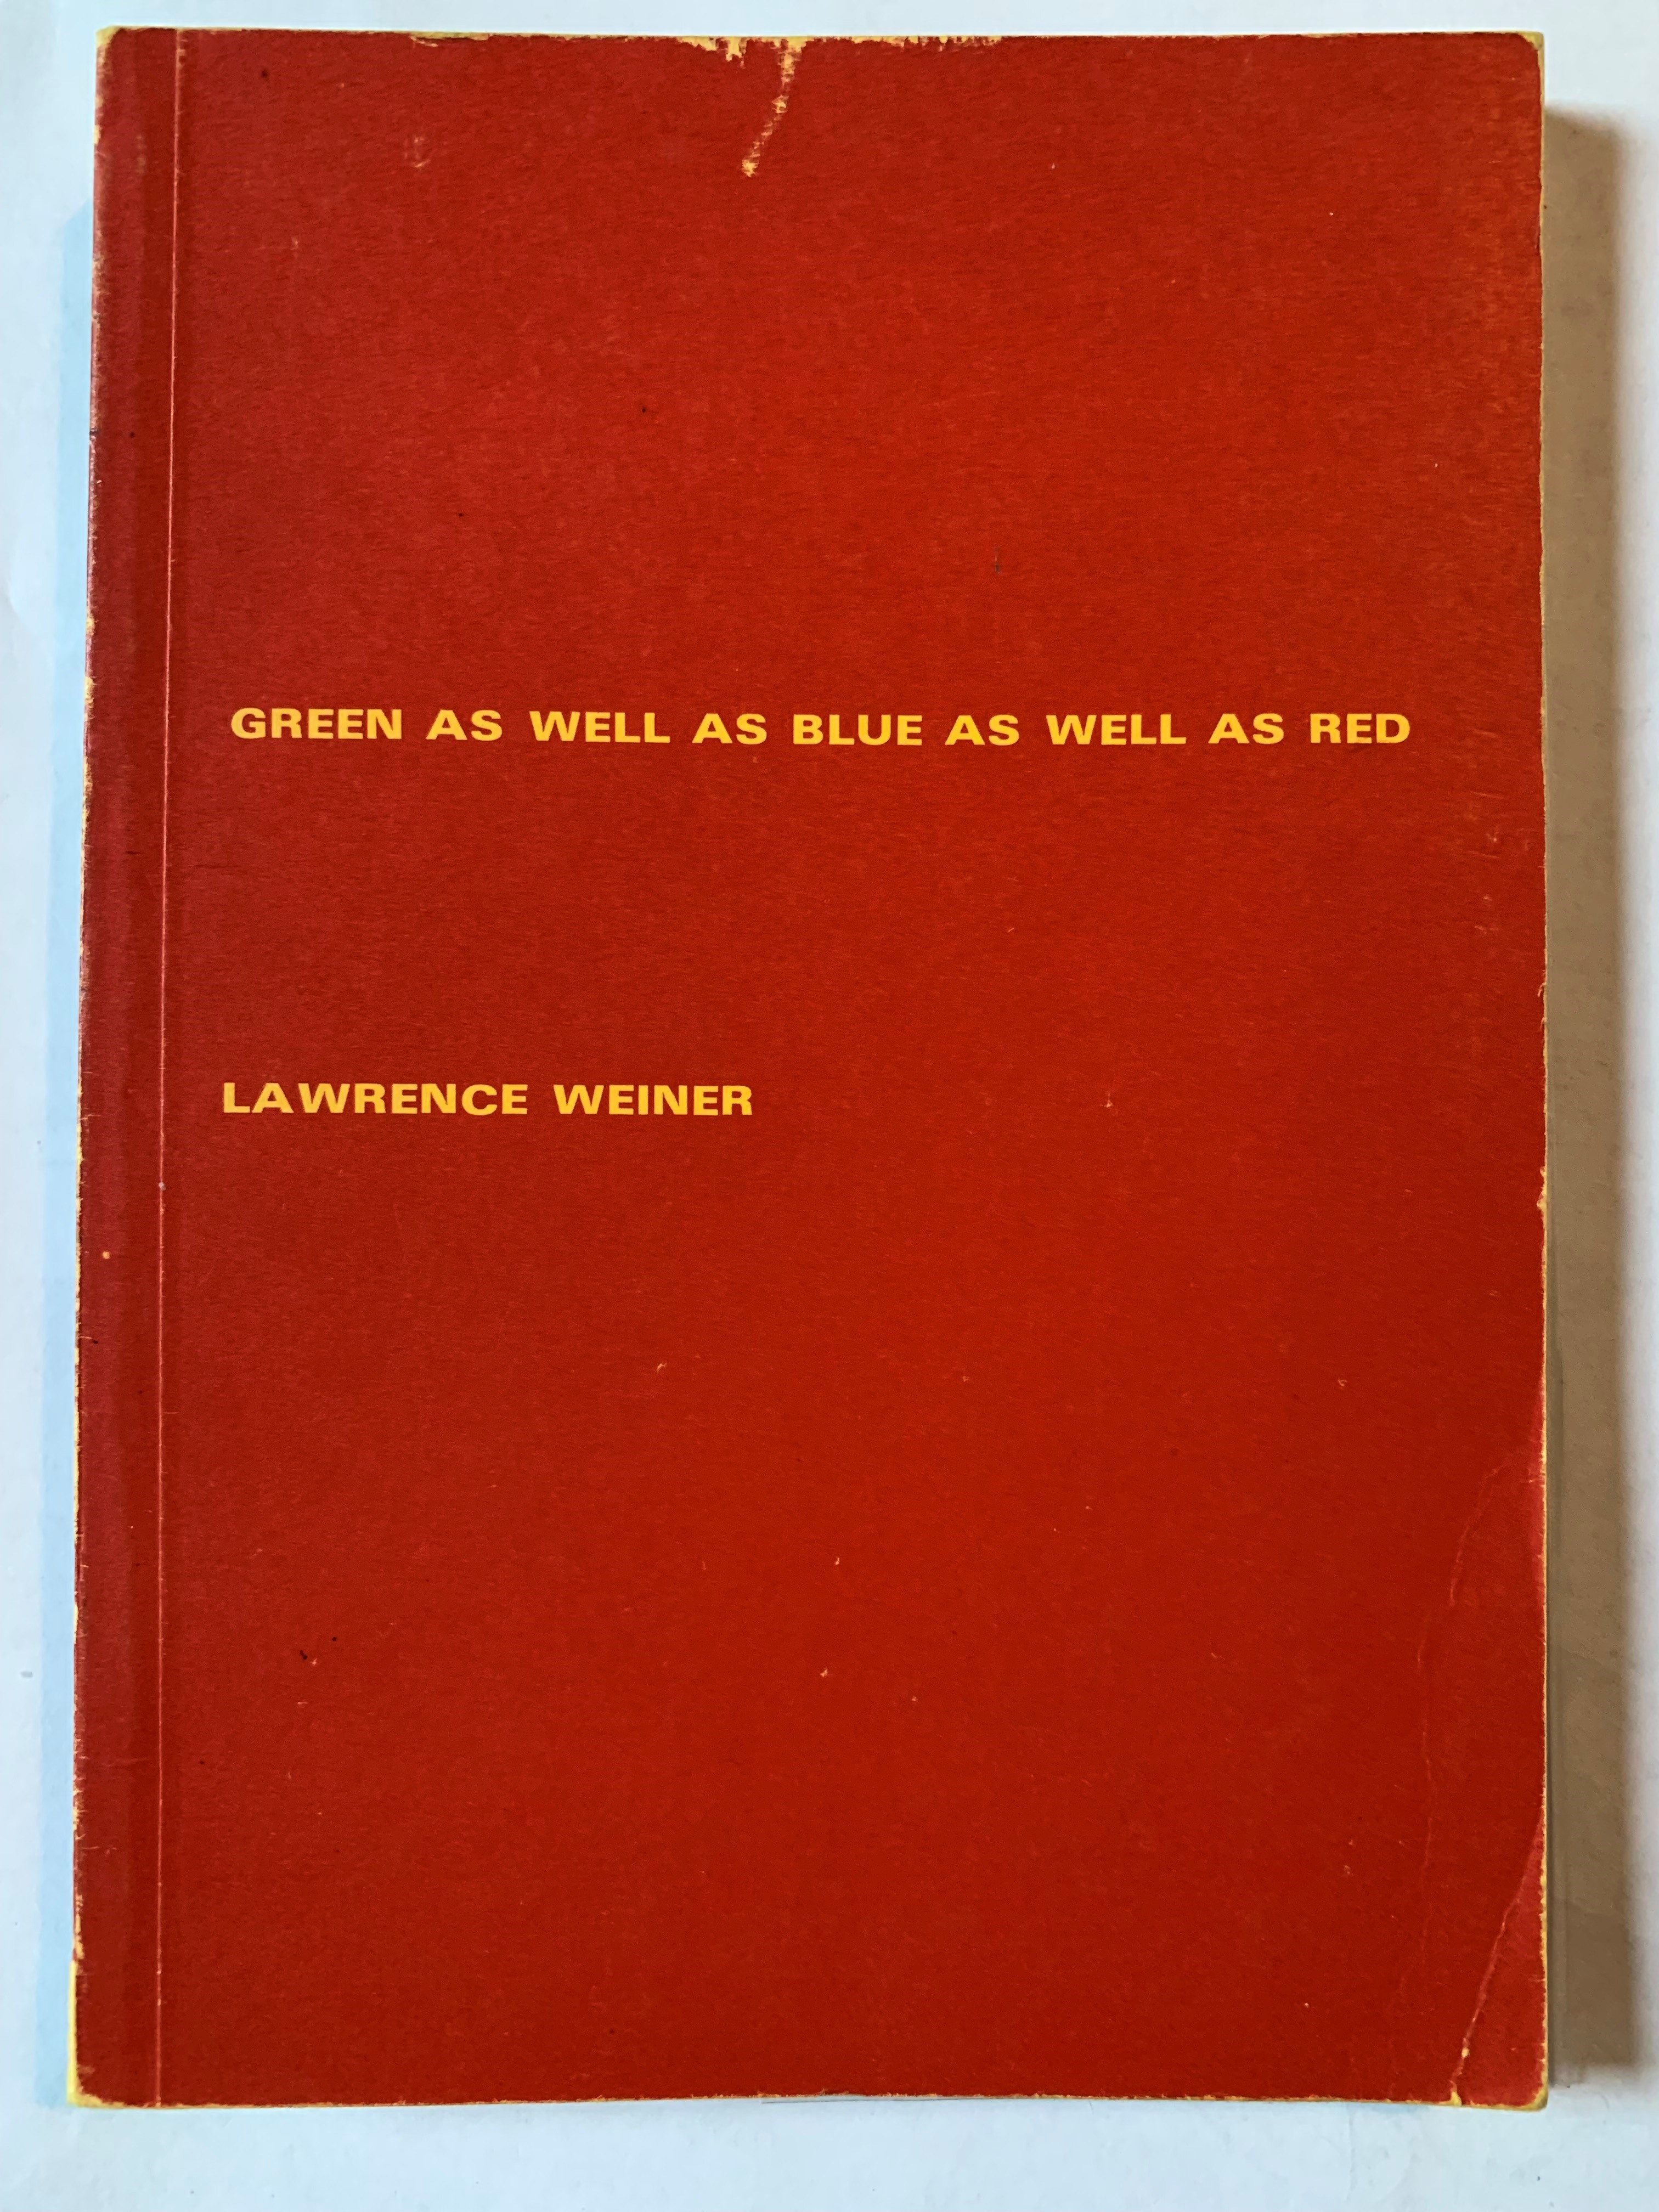 (WEINER, LAWRENCE). Weiner, Lawrence - AND/OR: GREEN AS WELL AS BLUE AS WELL AS RED - LAWRENCE WEINER